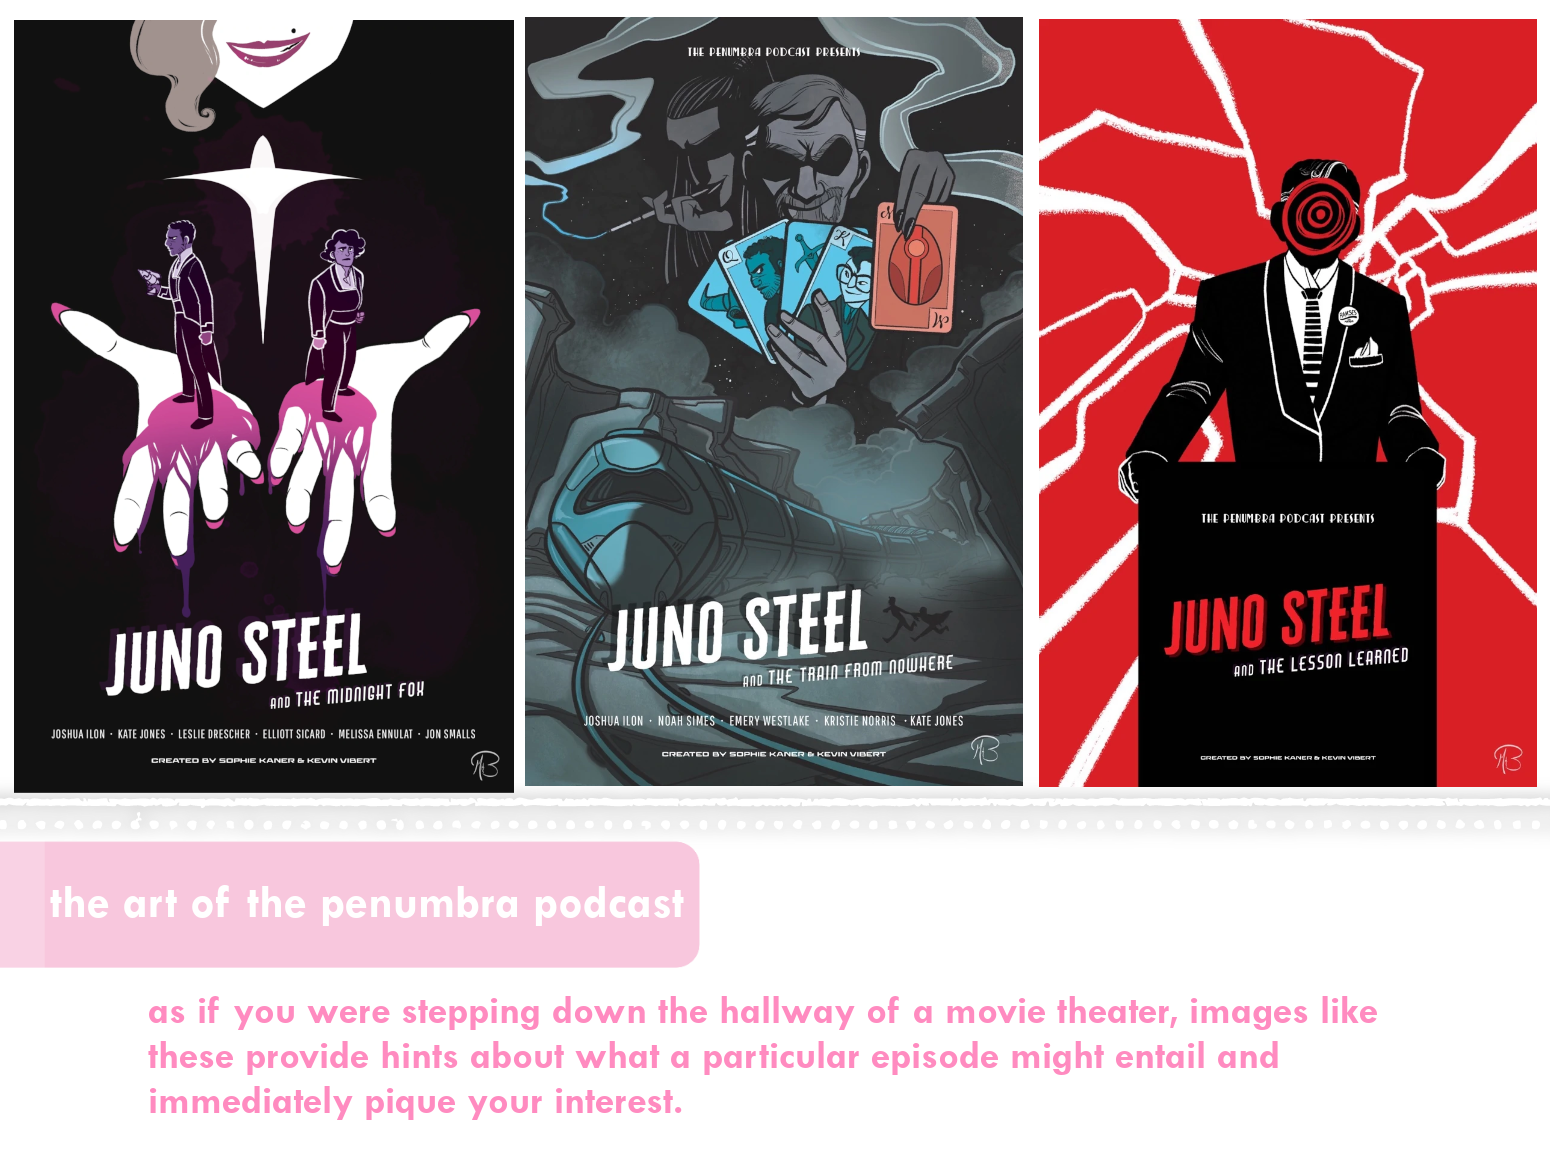 Three June Steel posters: the first, "June Steel and the Midnight Fox", shows the mouth of a smirking woman extending her hands from blackness. The hands are covered in magenta blood, and a person stands on each one. The second, "June Steel and the Train from Nowhere" has a gangster smirking amid smoke from someone in the background smoking a cigarette in a holder. The gangster is holding up four blue cards, and the person behind him is holding one red card; the suits are people and objects from teh episode. The third image, "Juno Steel and the Lesson Learned" has a bright red background struck through with white lightning. In the foreground is a politician standing at a podium, but his face has been replaced with a black and red spiral. Noted beneath these images: "The art of the Penumbra Podcast: As if you were stepping down the hallway of a movie theater, images like these provide hints about what a particular episode might entail and immediately pique your interest."